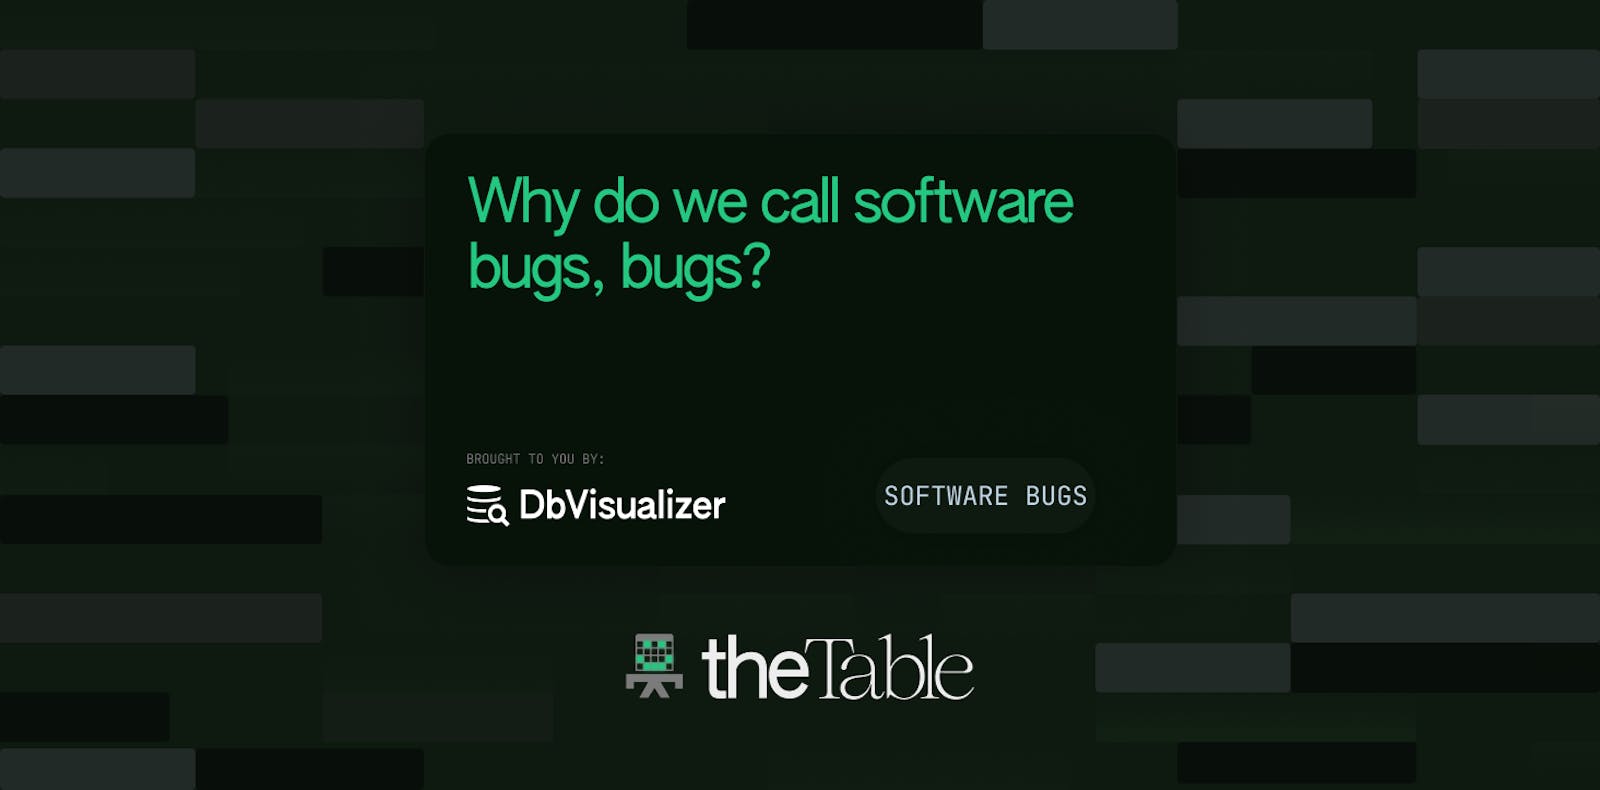 Why do we call software bugs, bugs?